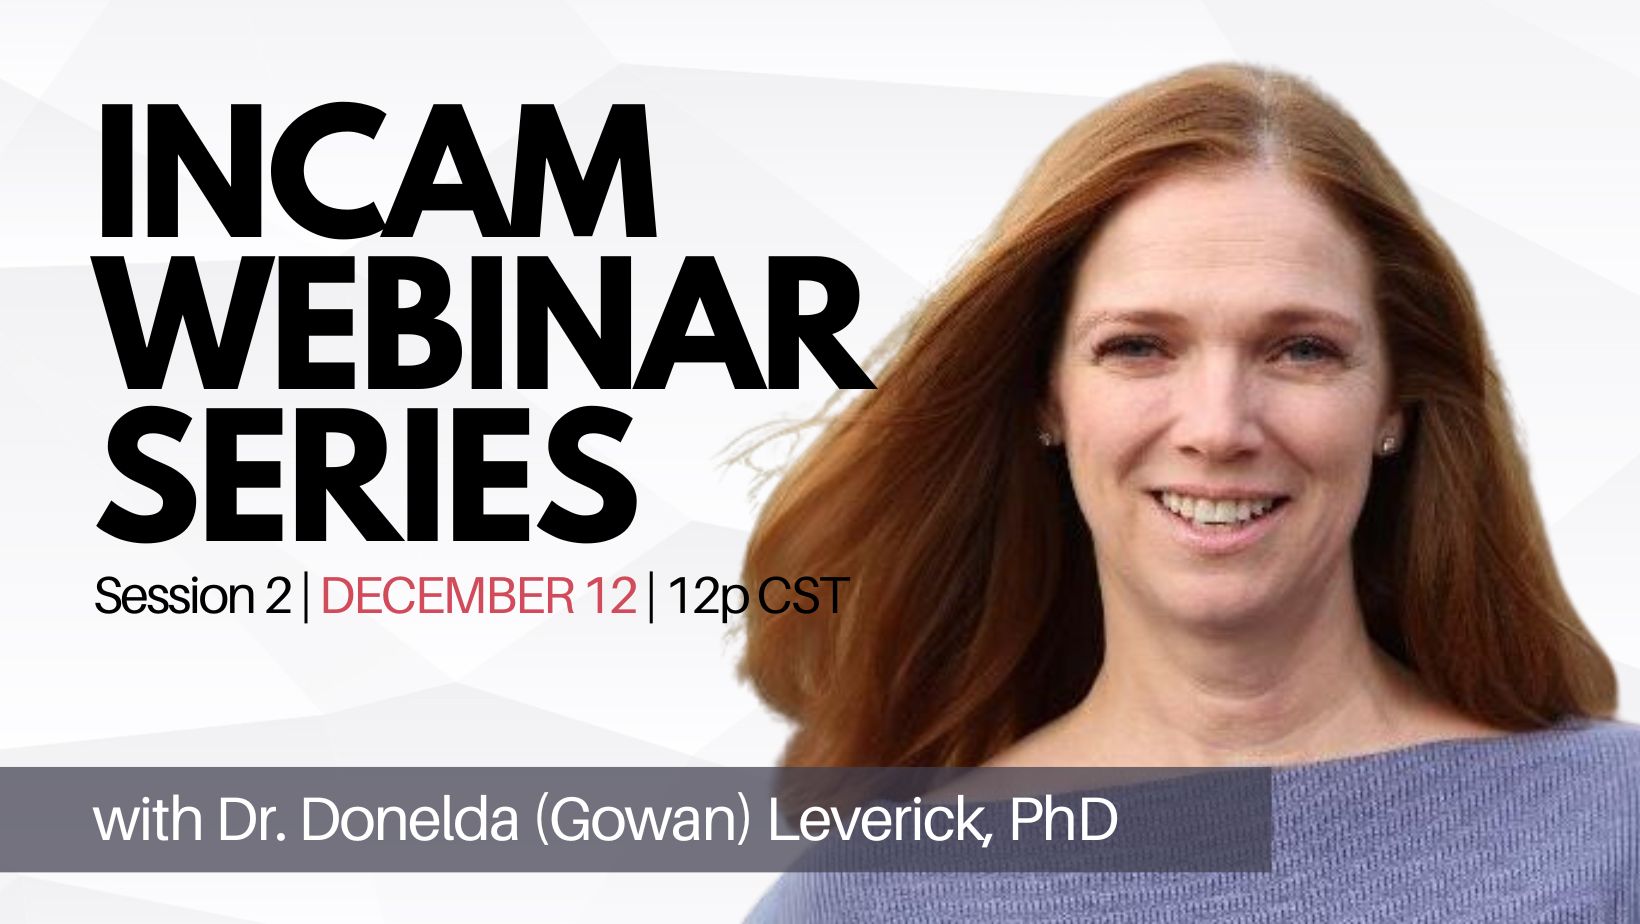 A promotional image for the INCAM Webinar Series Session 2 scheduled for December 12 at 12pm CST featuring Dr. Donelda Gowan Leverick. The image includes text that reads 'INCAM Webinar Series, Session 2, December 12, 12pm CST with Dr. Donelda Gowan Leverick' alongside a picture of Dr. Leverick.